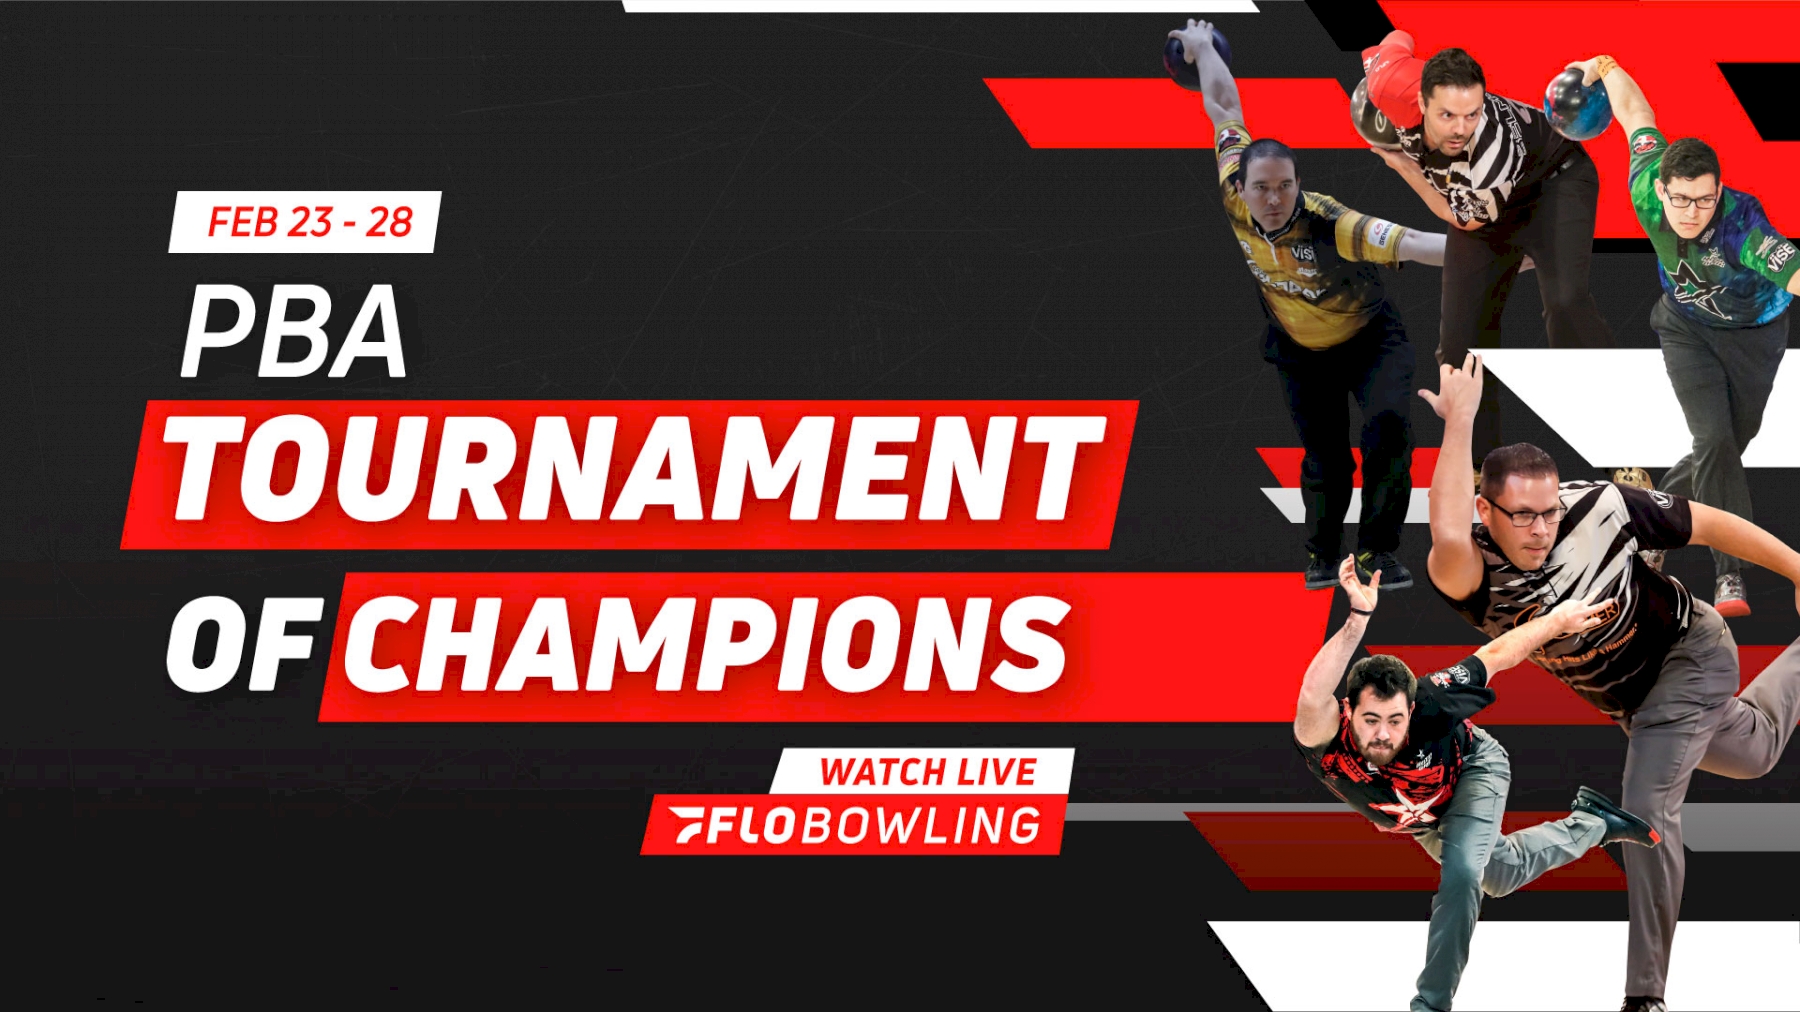 2021 PBA Tournament of Champions Schedule FloBowling